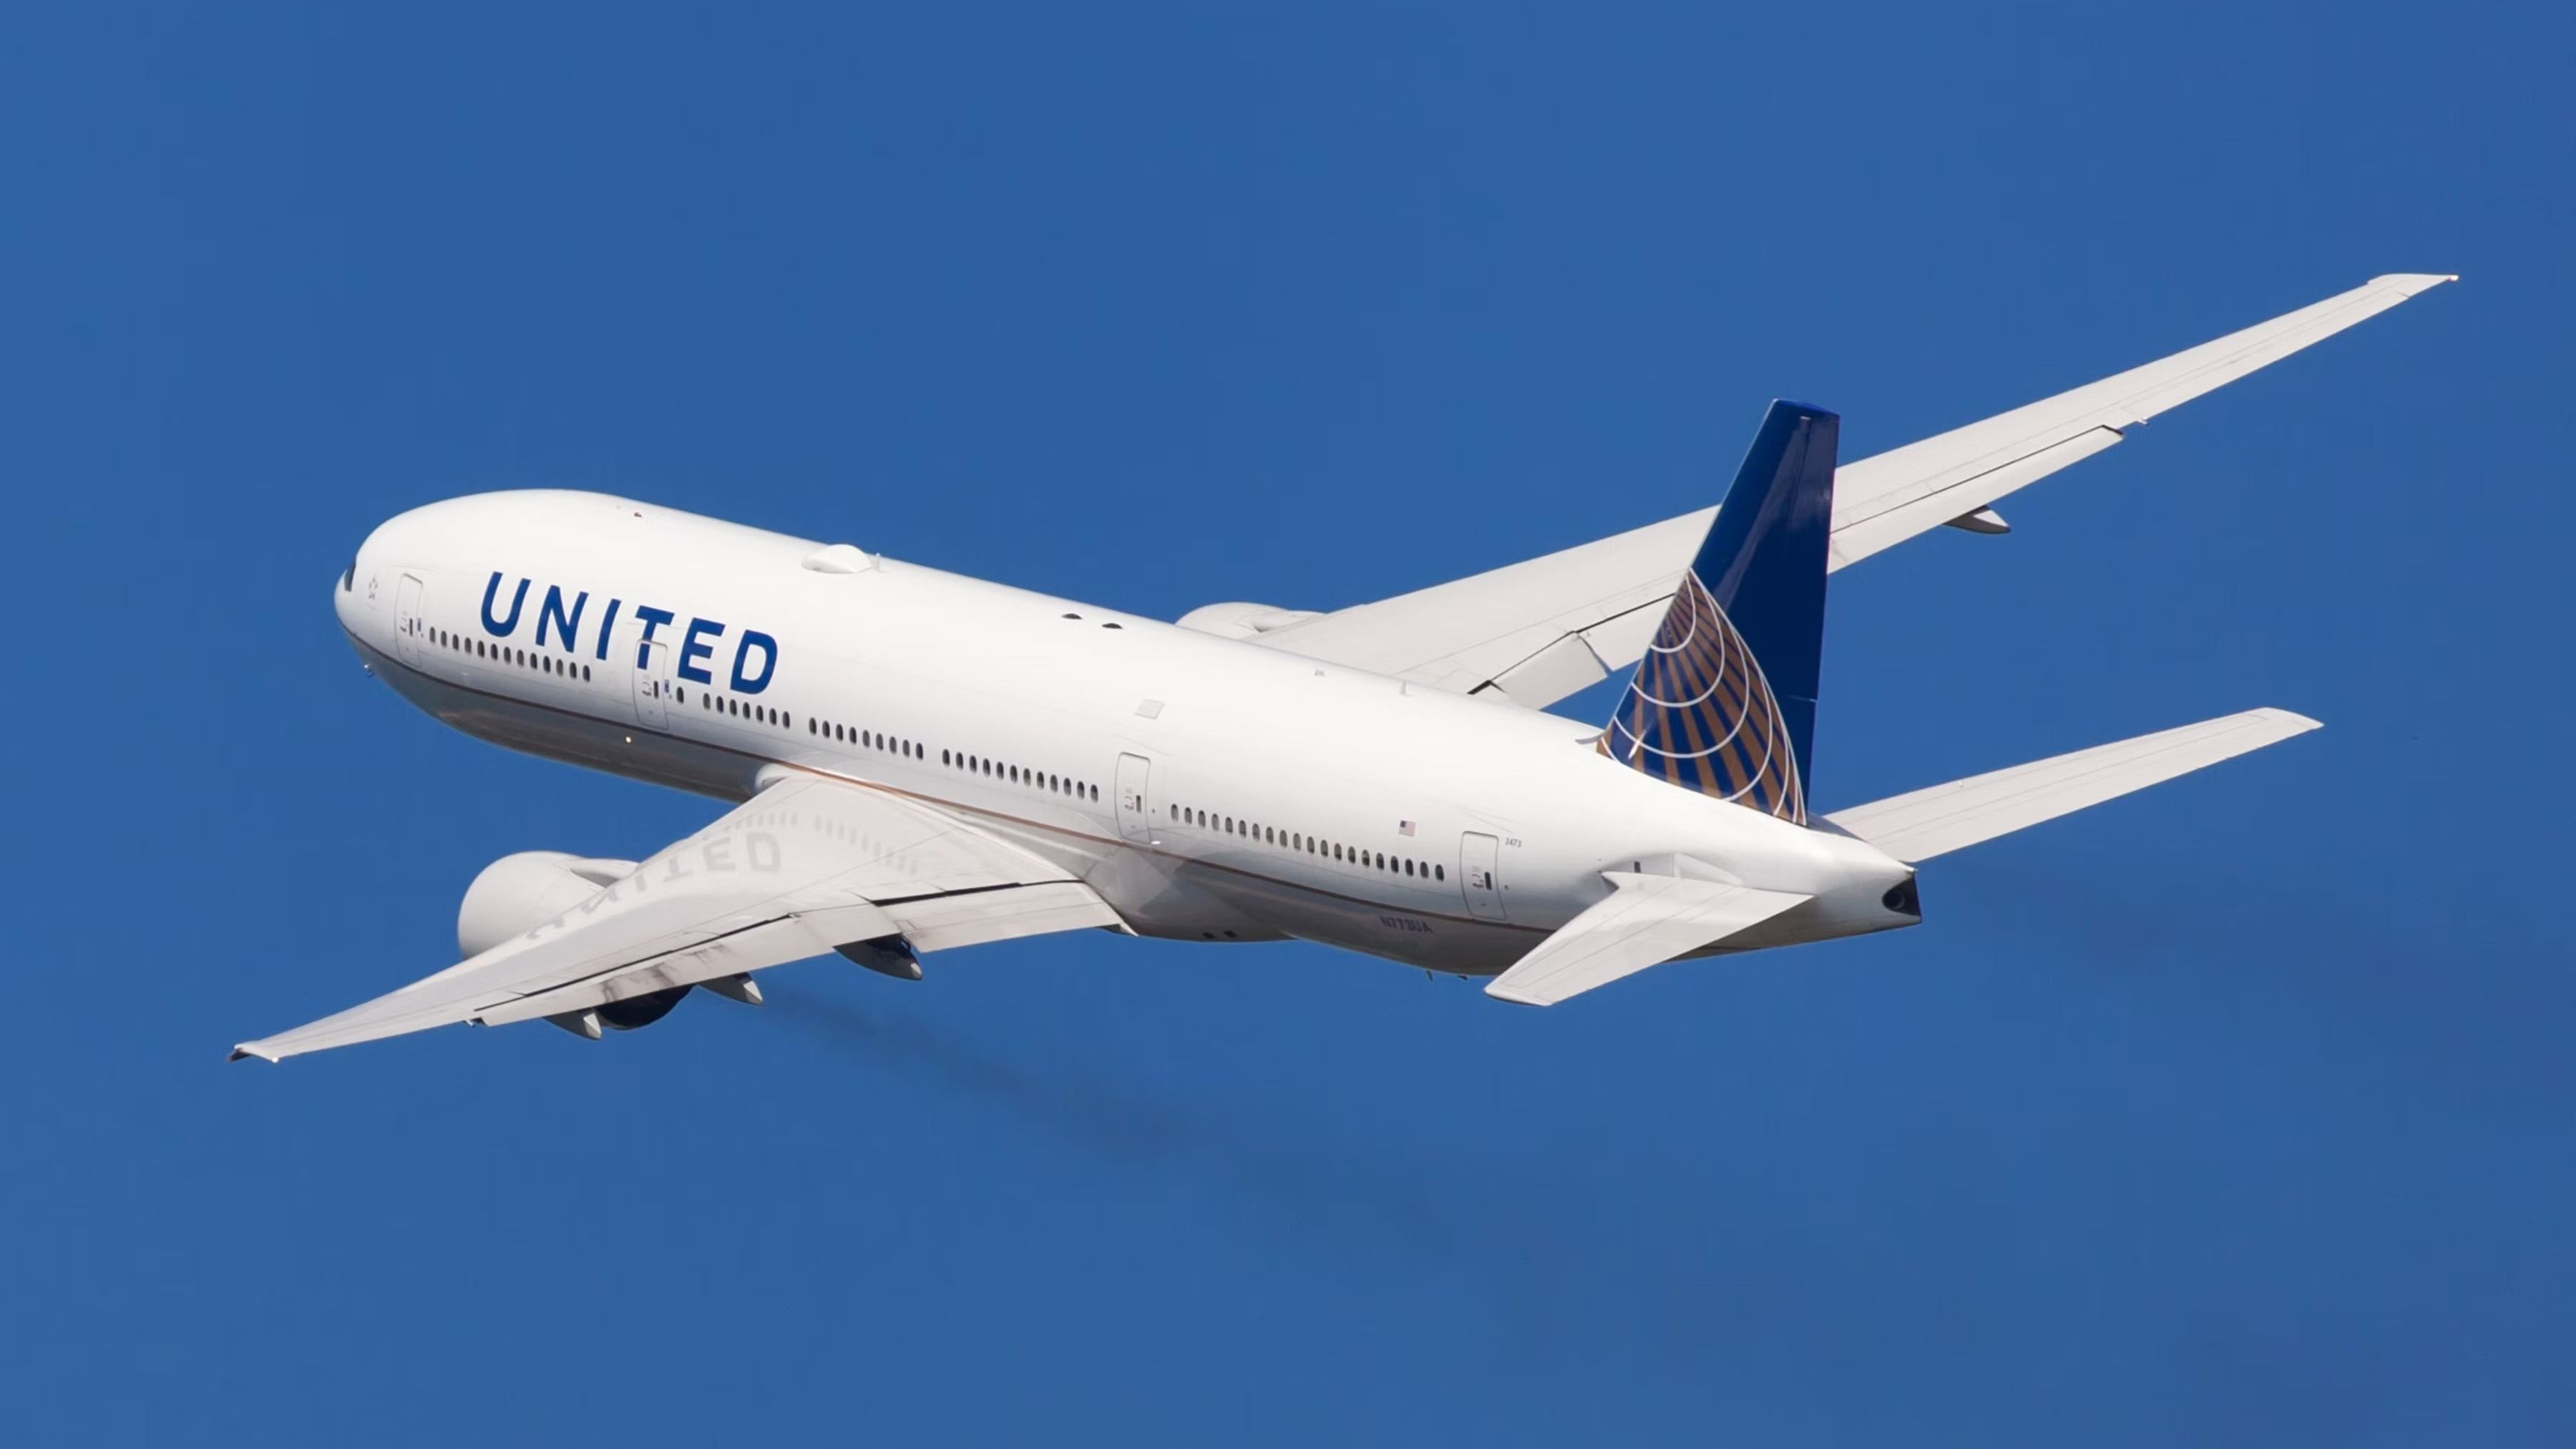 United Airlines Boeing 777-200 other than ER